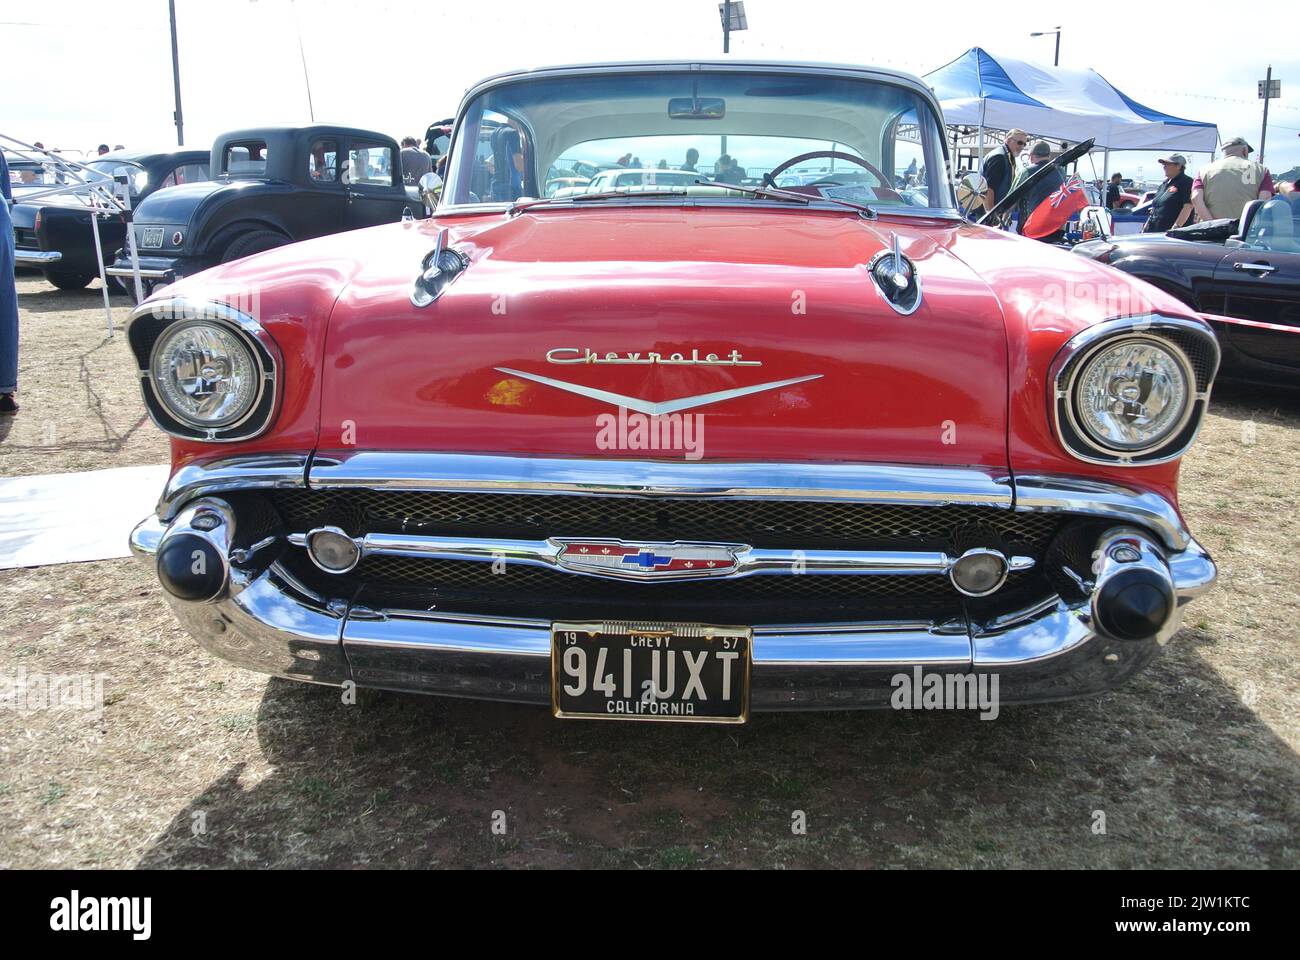 A 1957 Chevrolet Bel Air parked on display at the English Riviera classic car show, Paignton, Devon, England, UK. Stock Photo